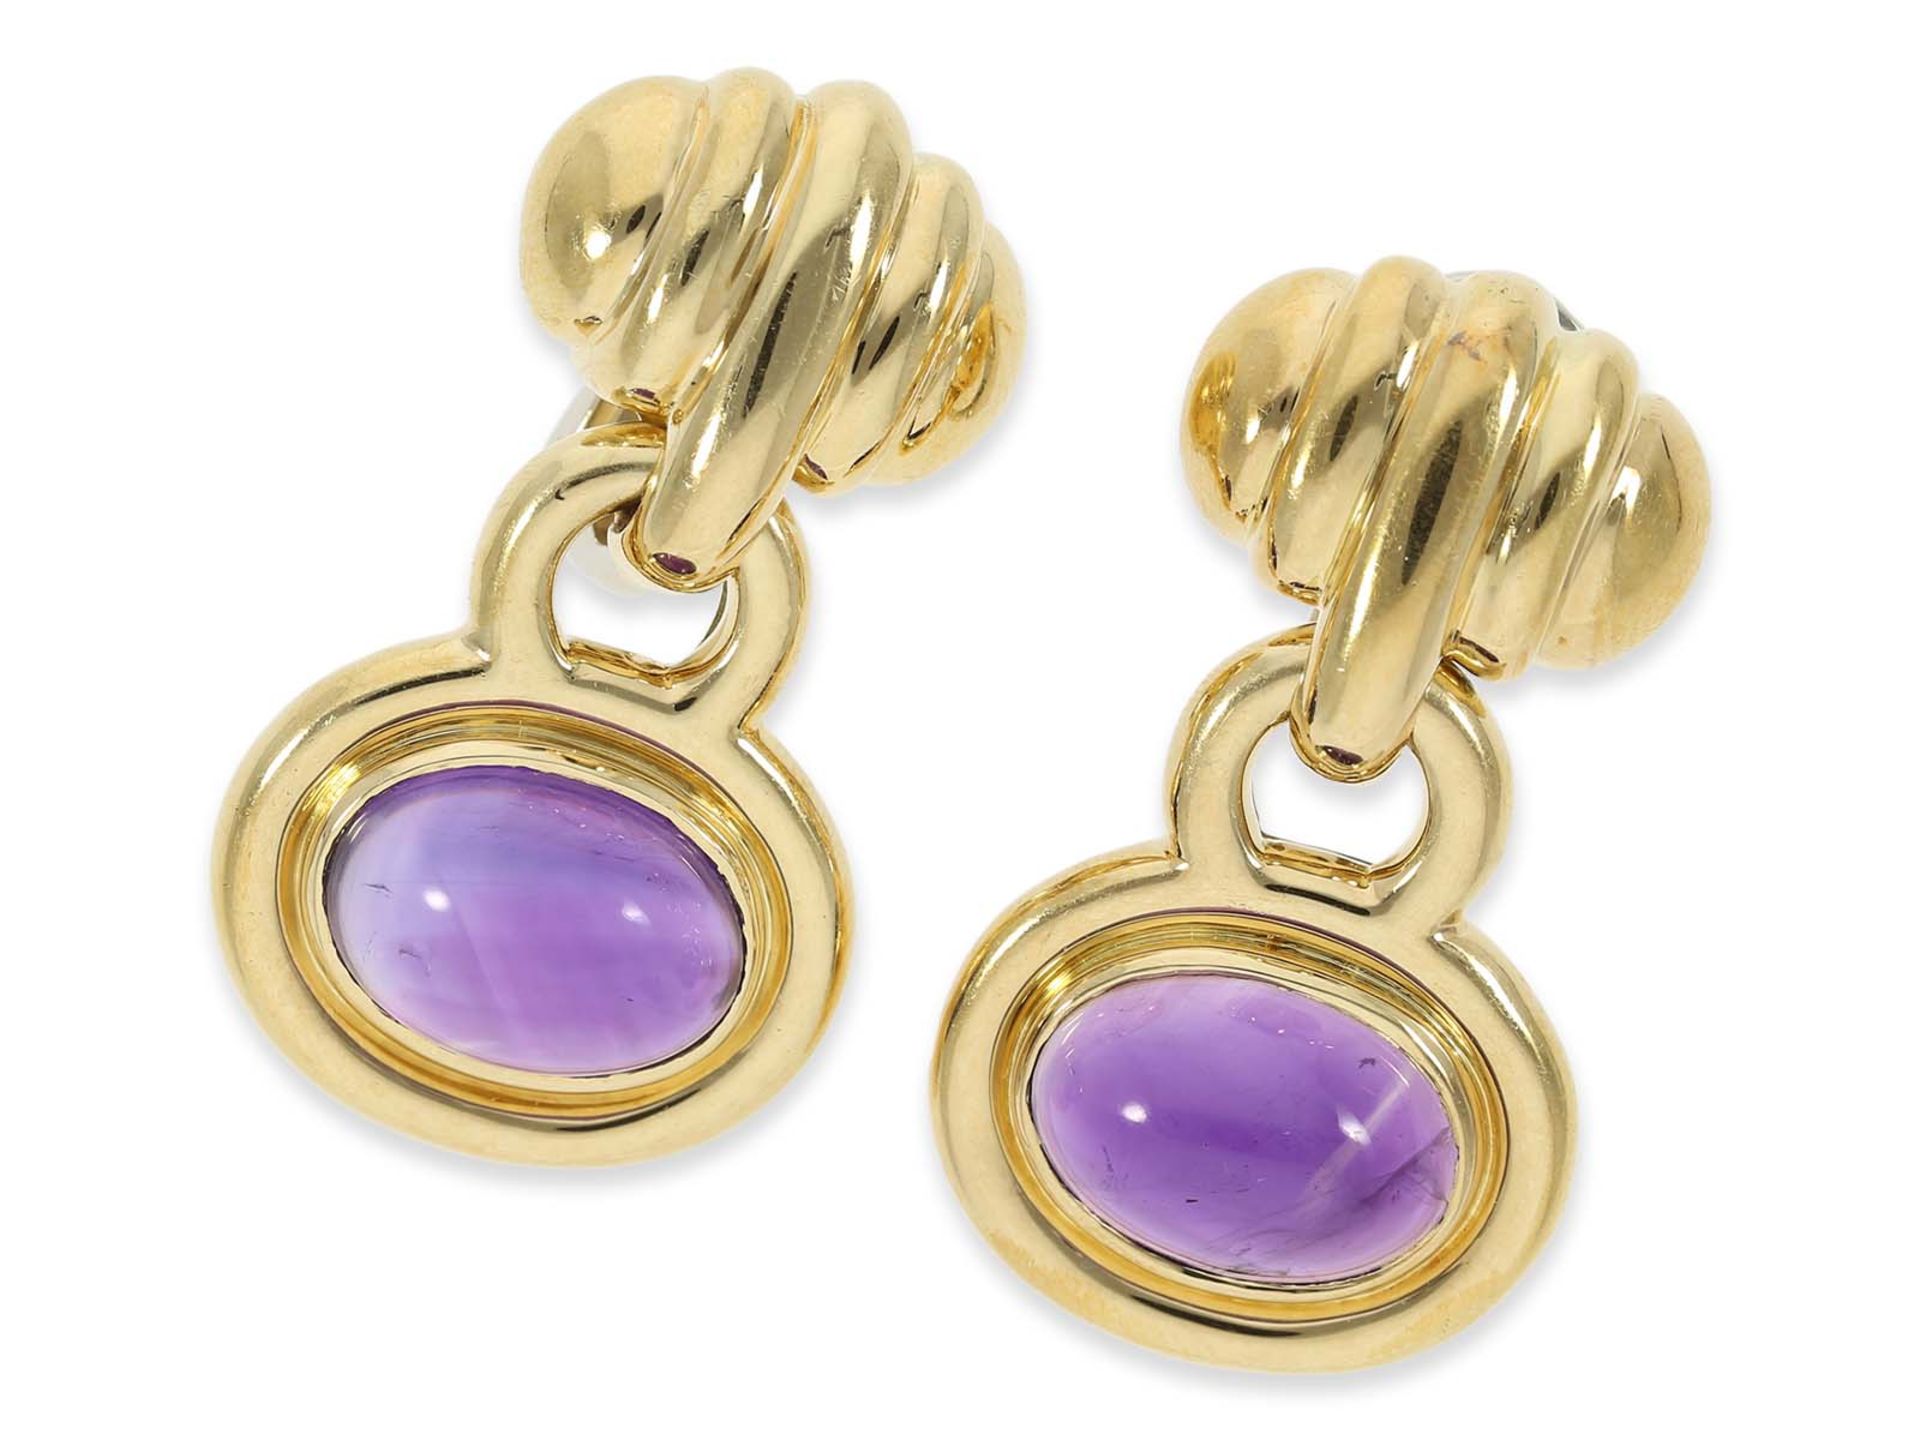 Earrings: high quality handmade ear clips with amethysts, together about 17,2ct, 18K gold - Image 2 of 3